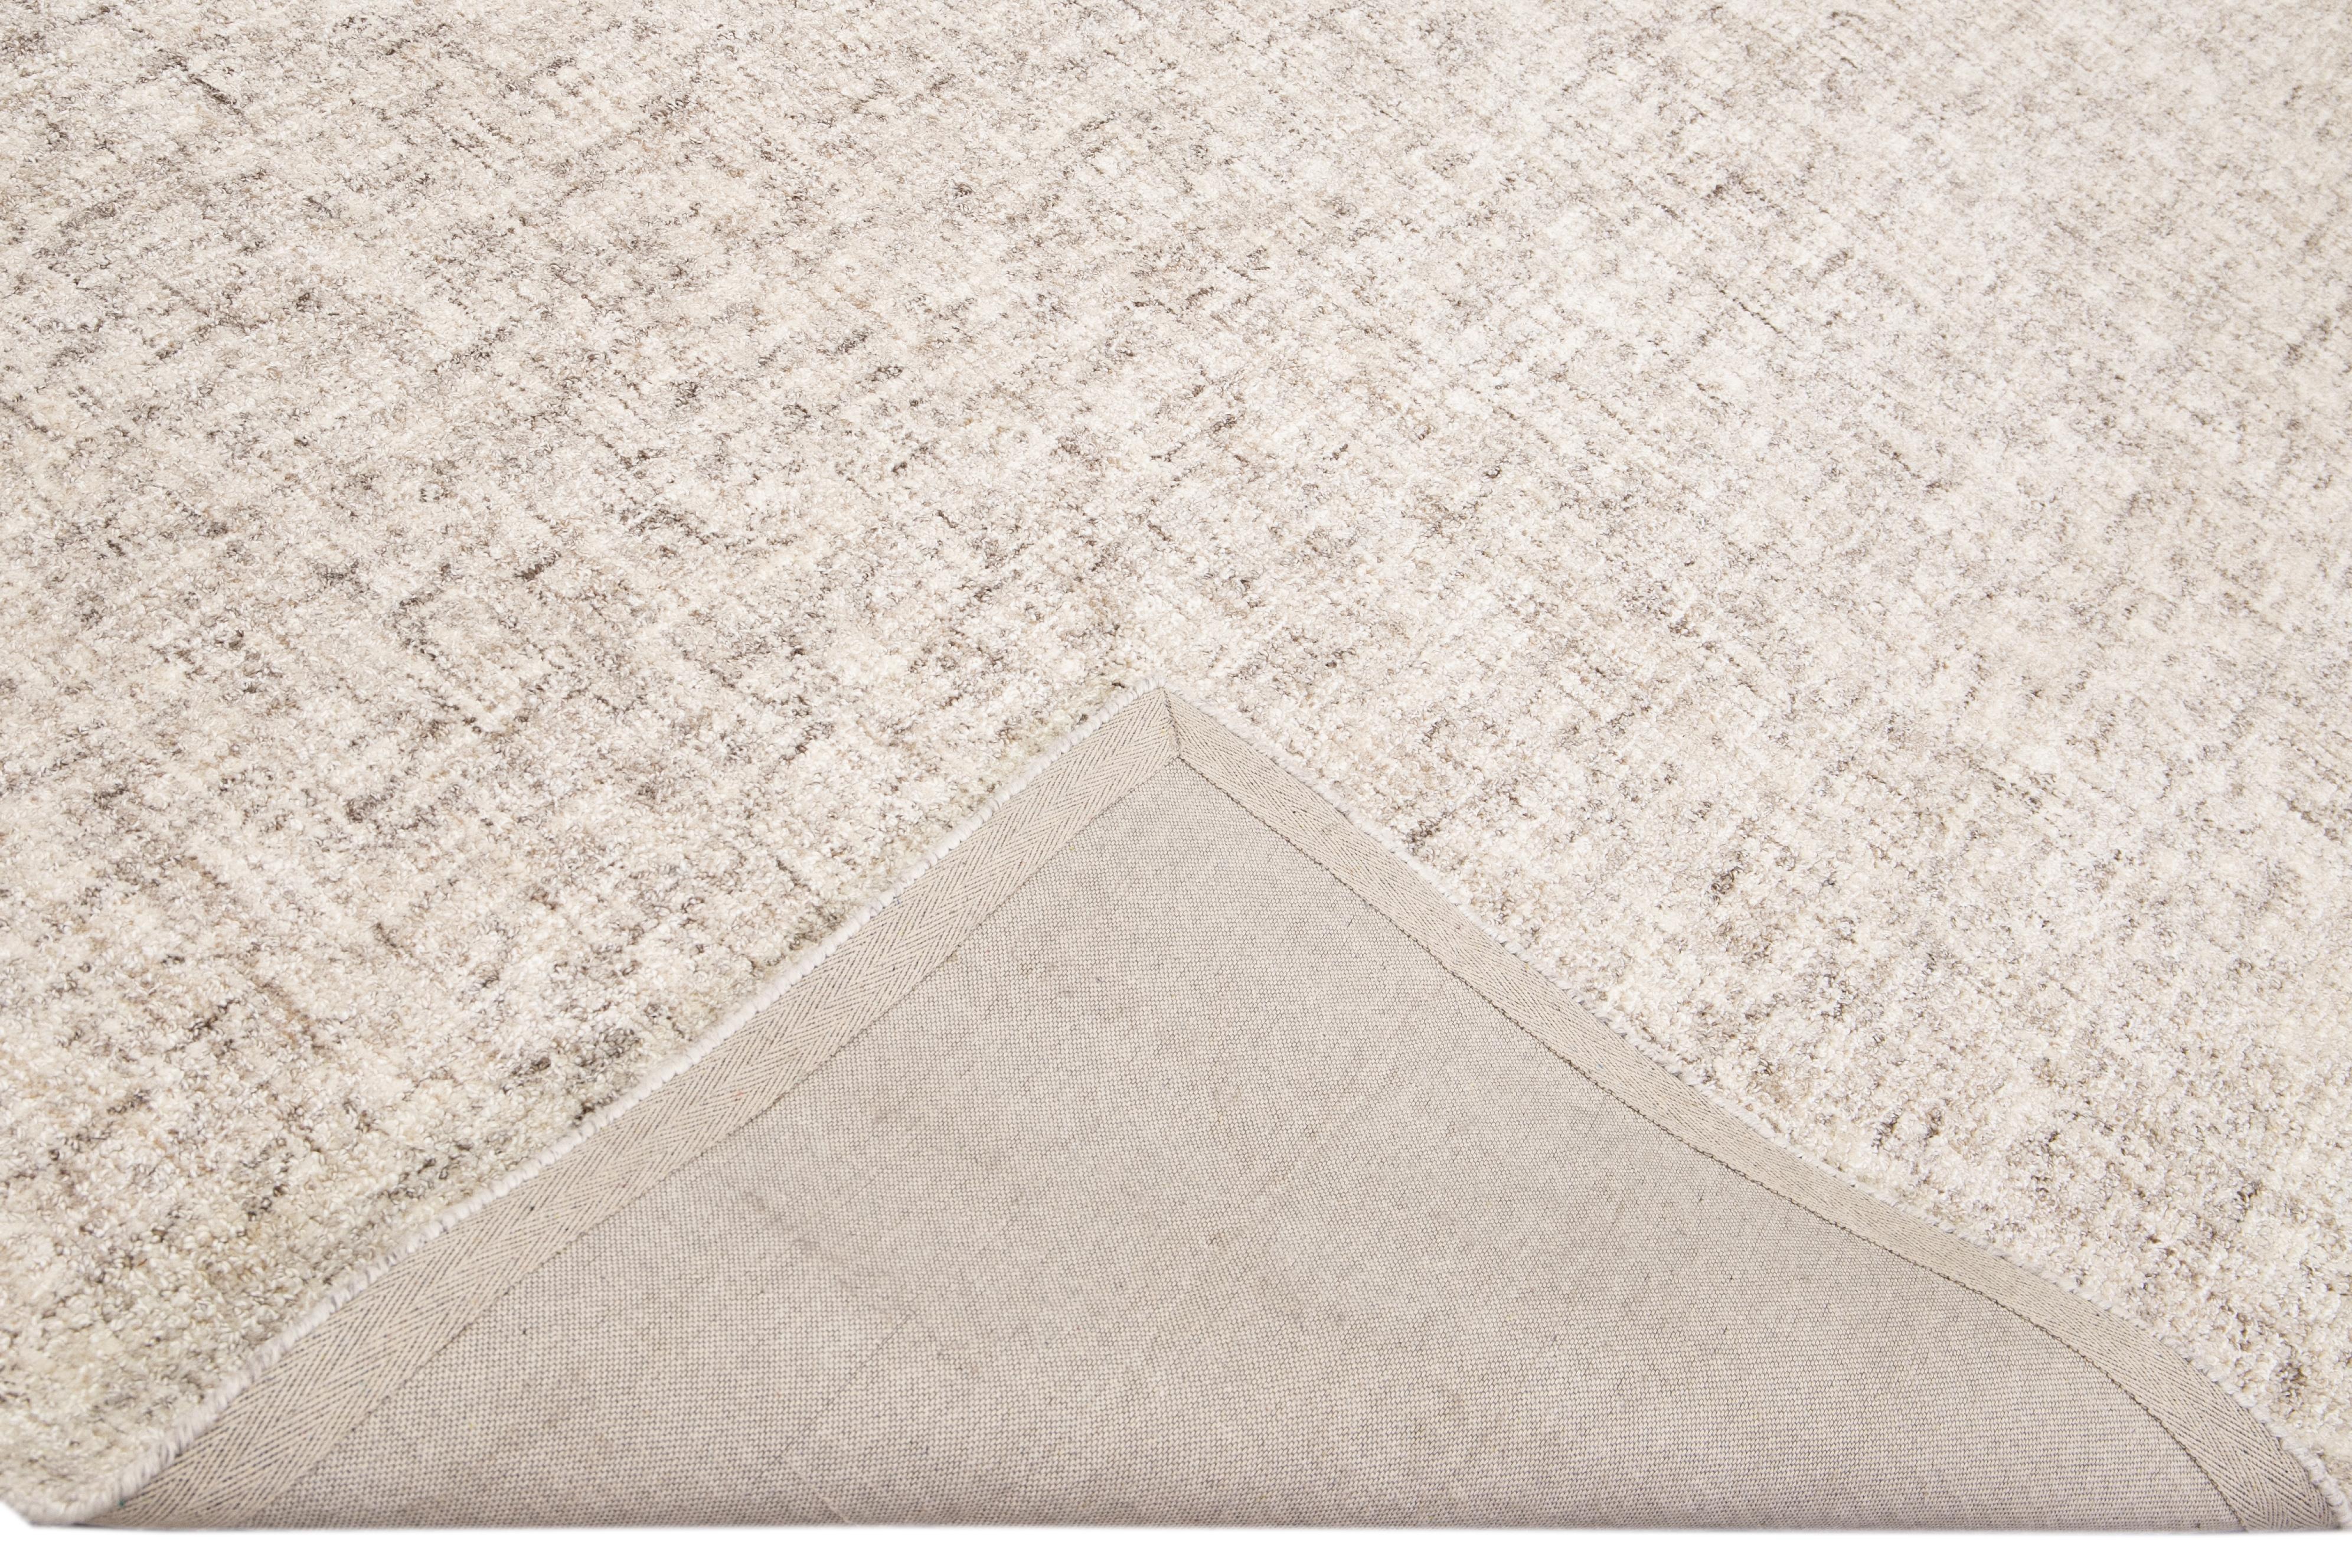 Beautiful Apadanas' collection hand tufted Indian natural wool rug with the beige and brown field. This Westport collection rug has an all-over solid strie design.

This rug measures: 9' x 12'.

Custom colors and sizes are available upon